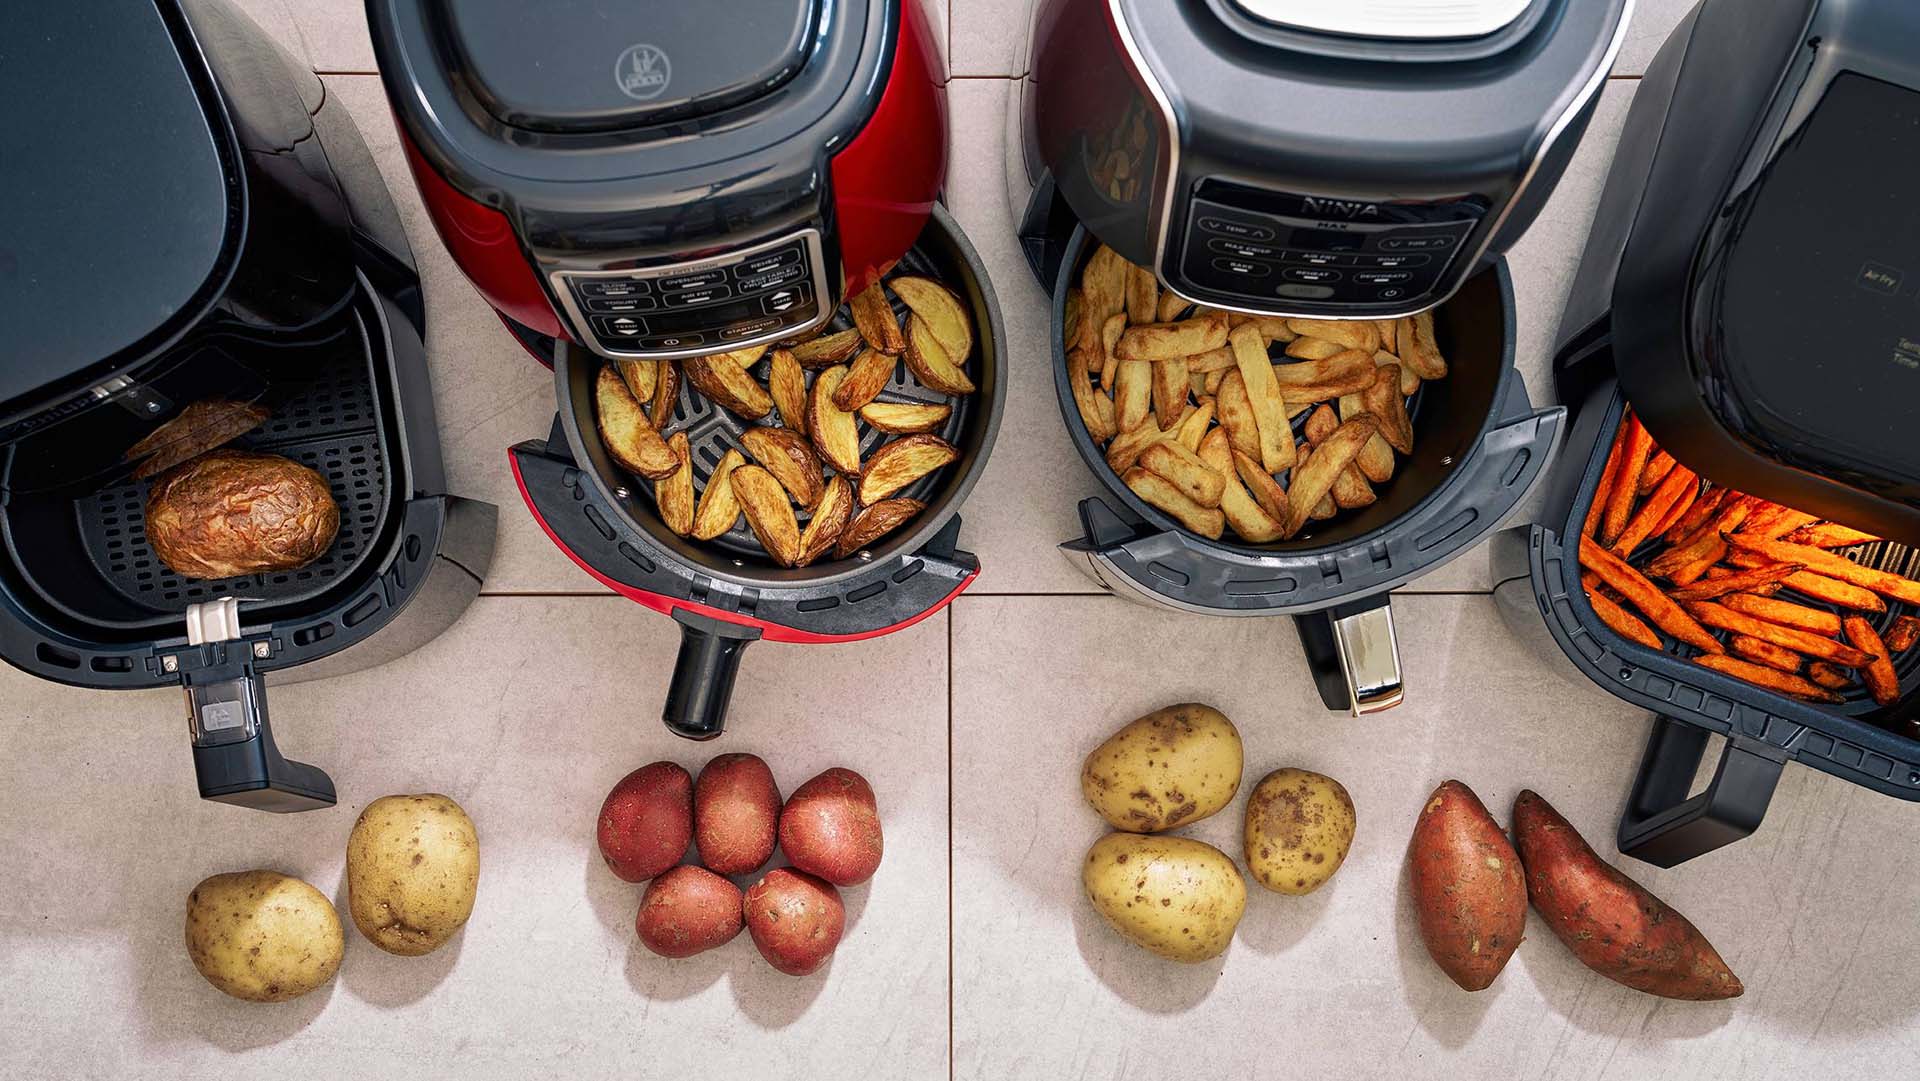 Potatoes cooked in air fryers